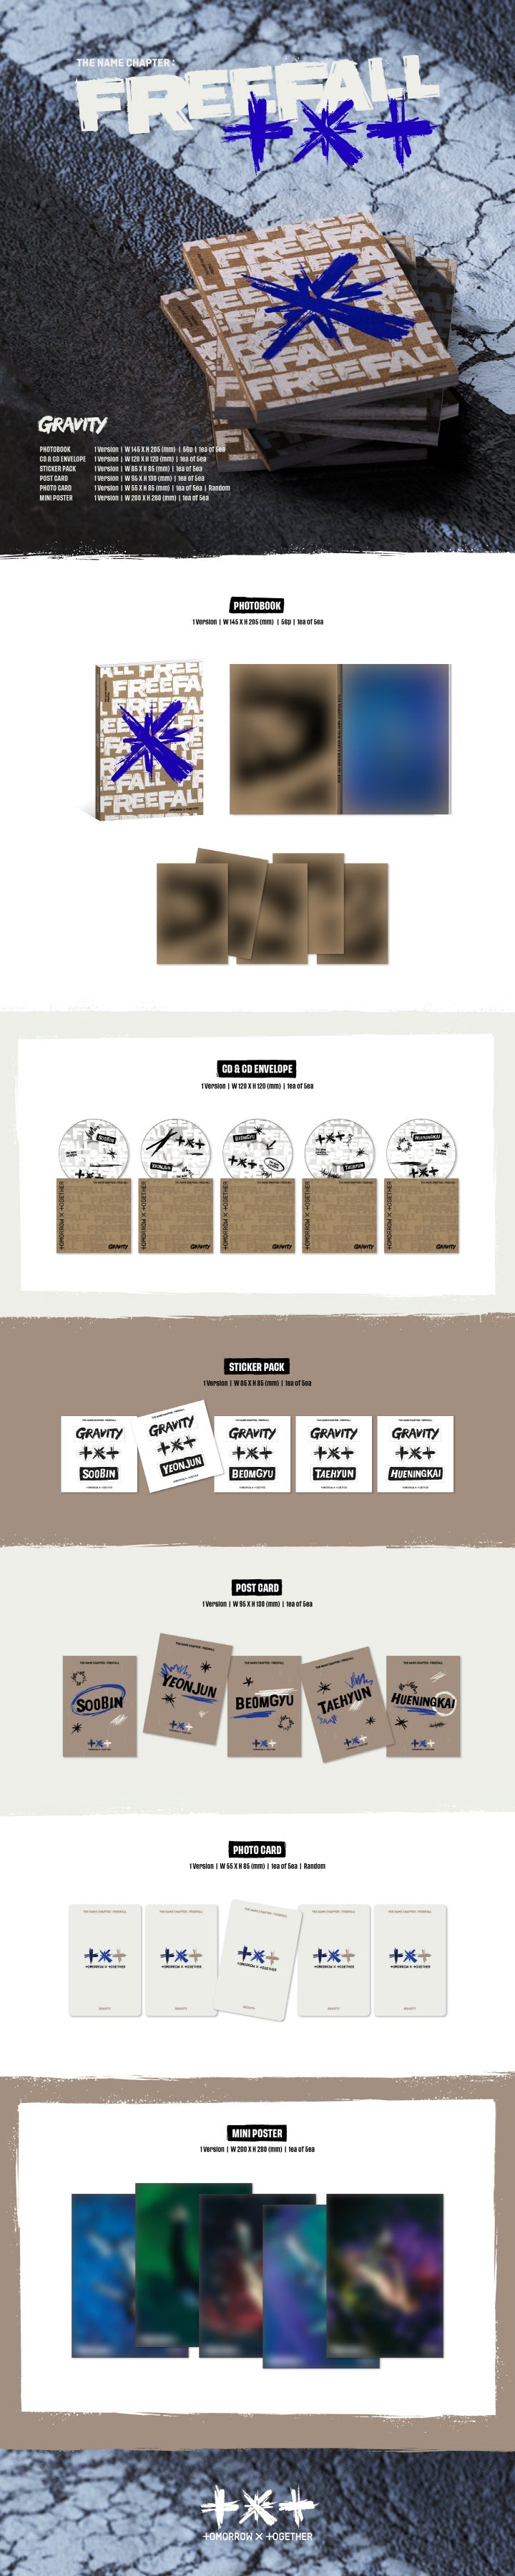 1 CD (random out of 5 types)
1 Photo Book (56 pages, random out of 5 types)
1 Sticker Pack (random out of 5 types)
1 Postc...